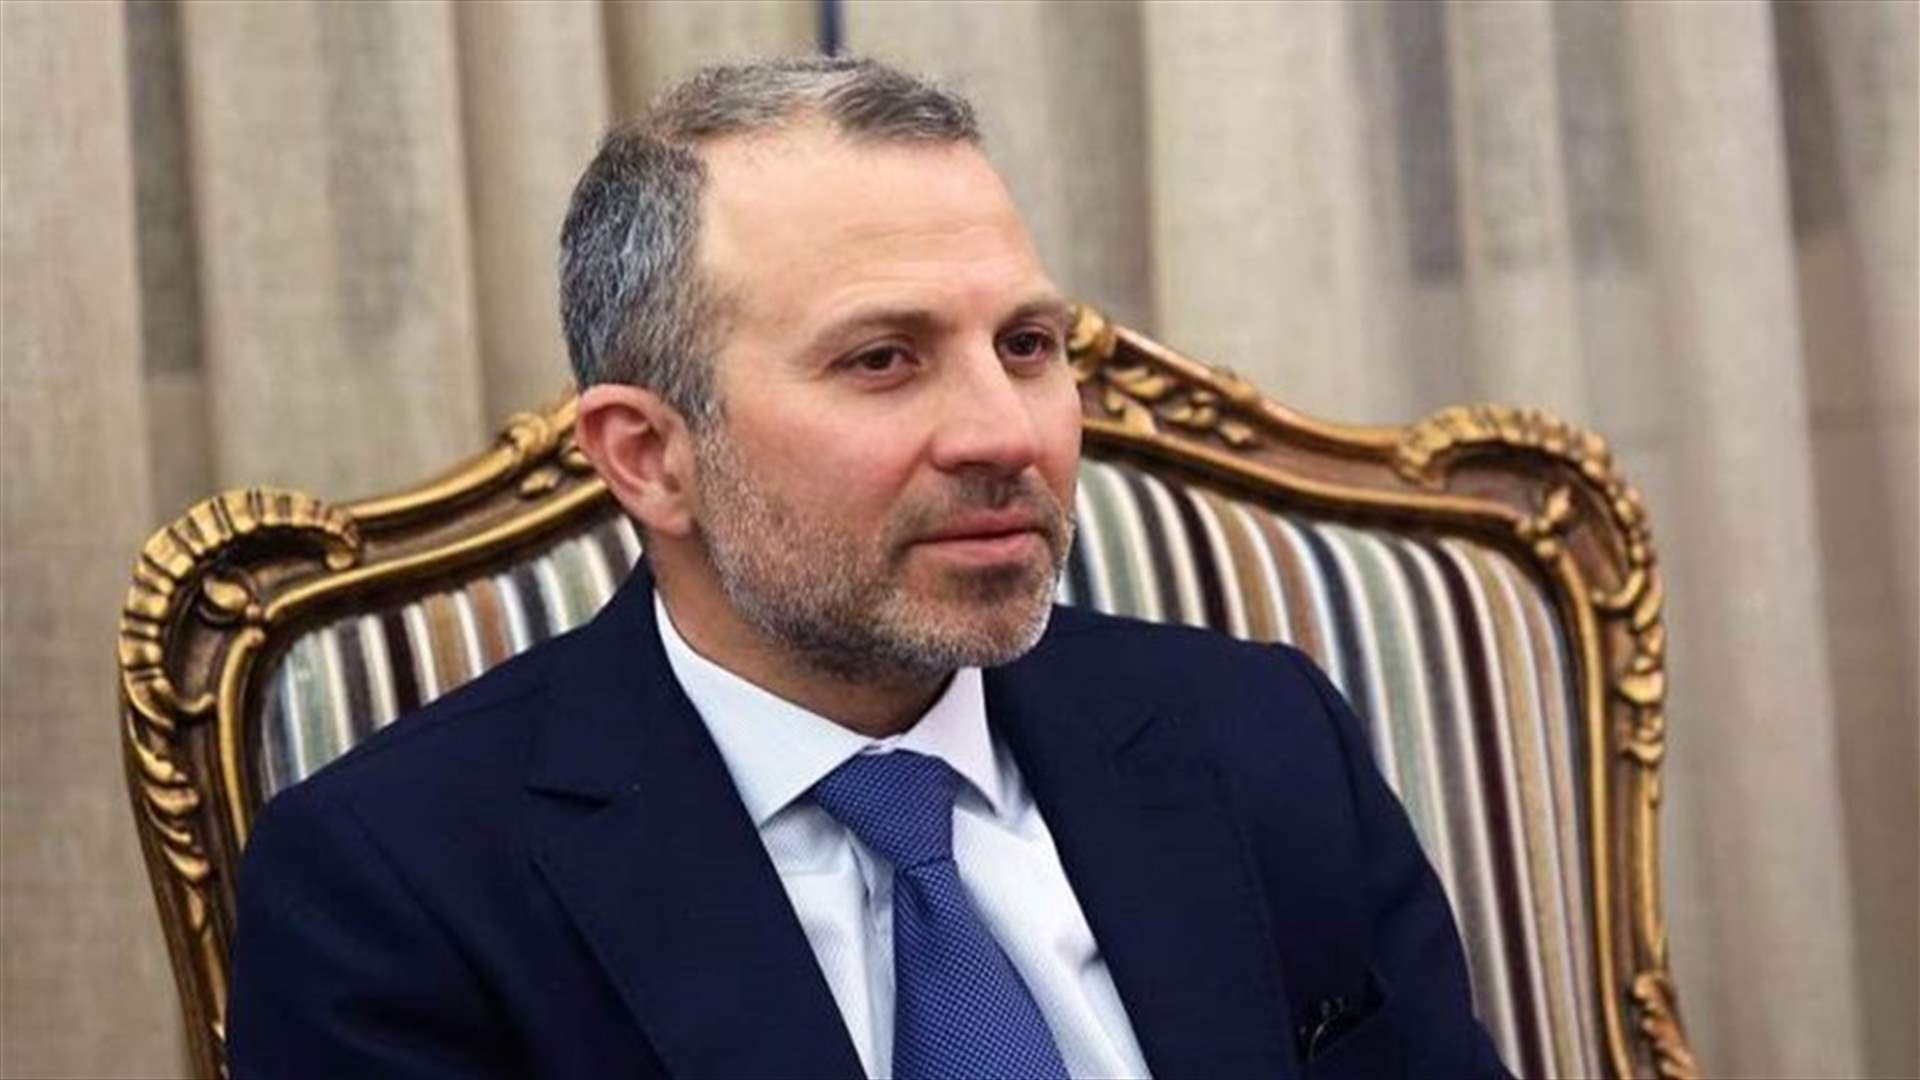 Minister Bassil to make a statement at 4:30 pm from Baabda palace